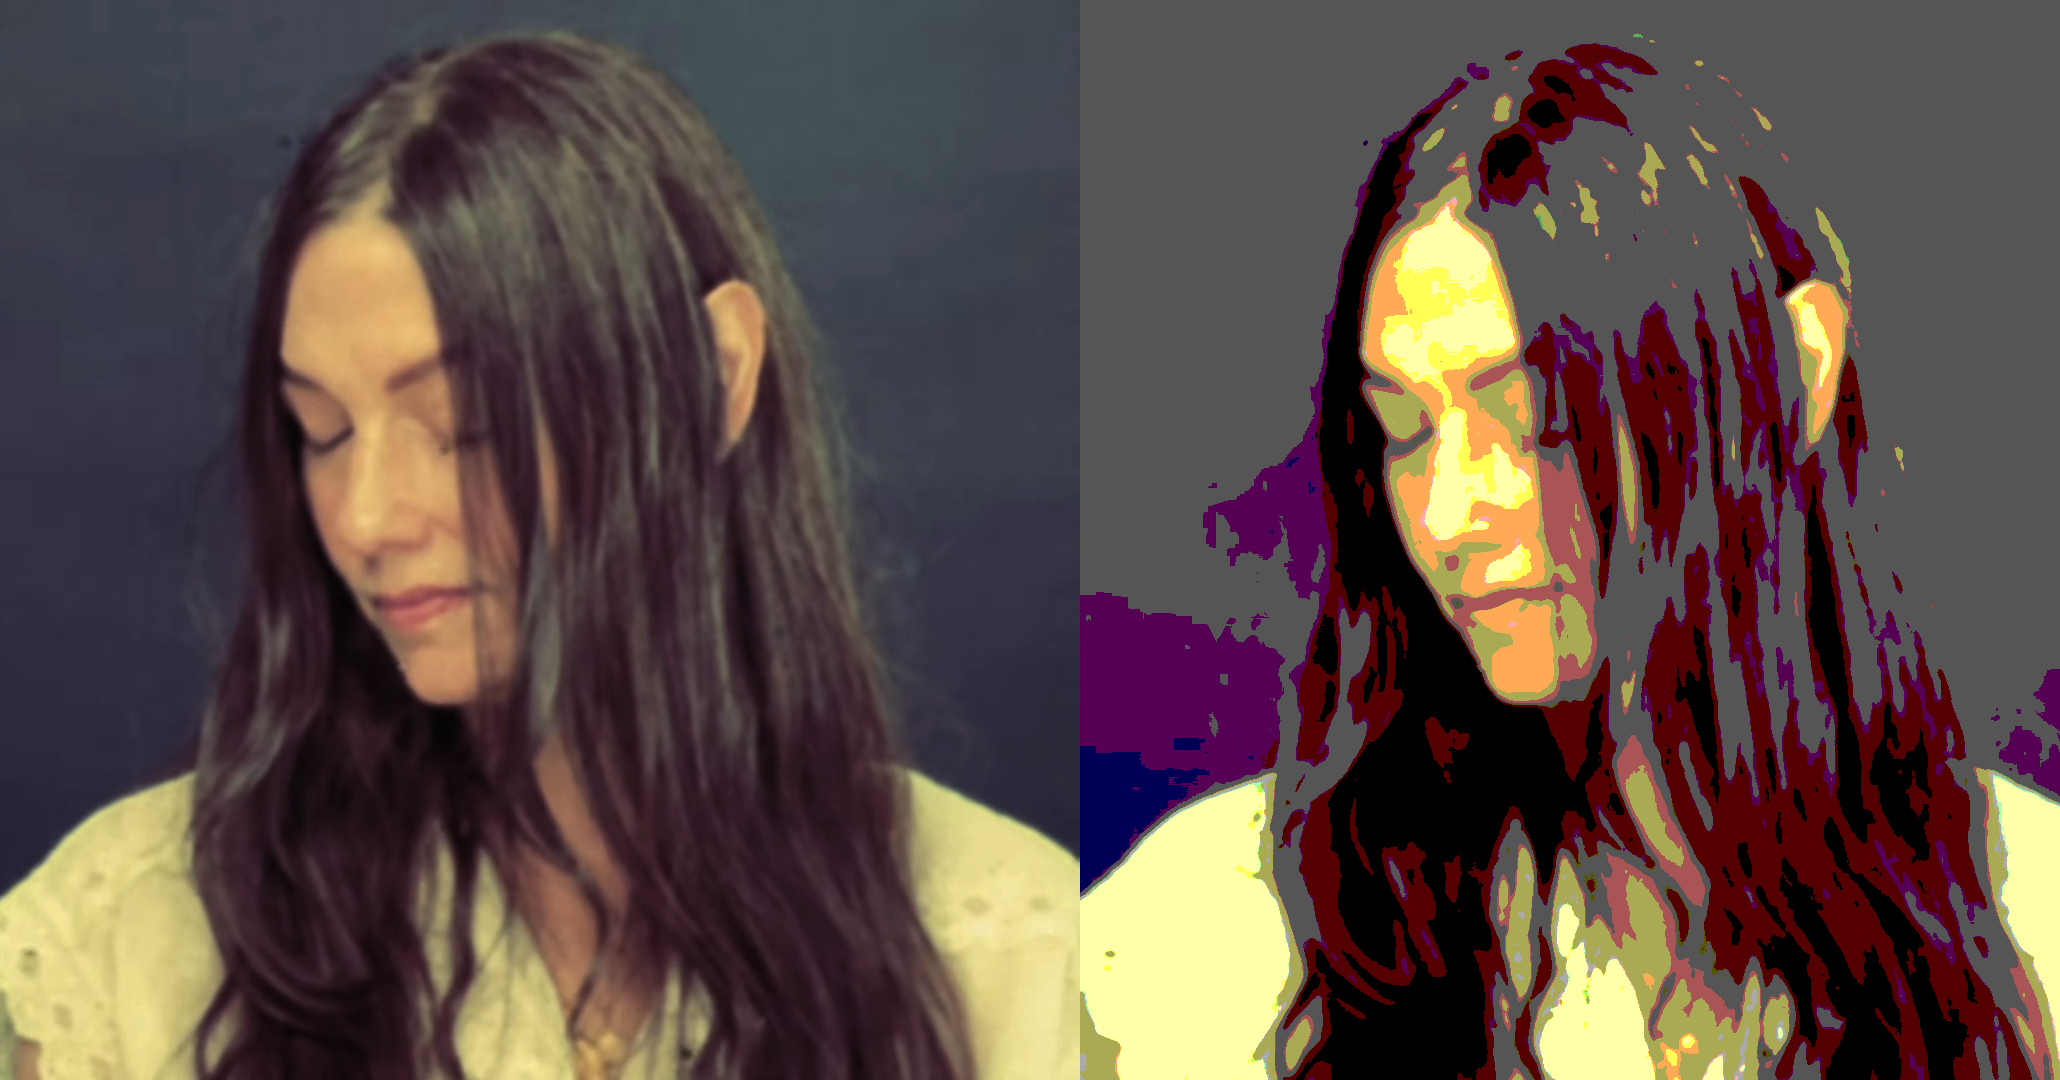 Diptych portrait of Sandy Bell, from her video "Monster Trying To Be A Lover," from her album "Entelechy."